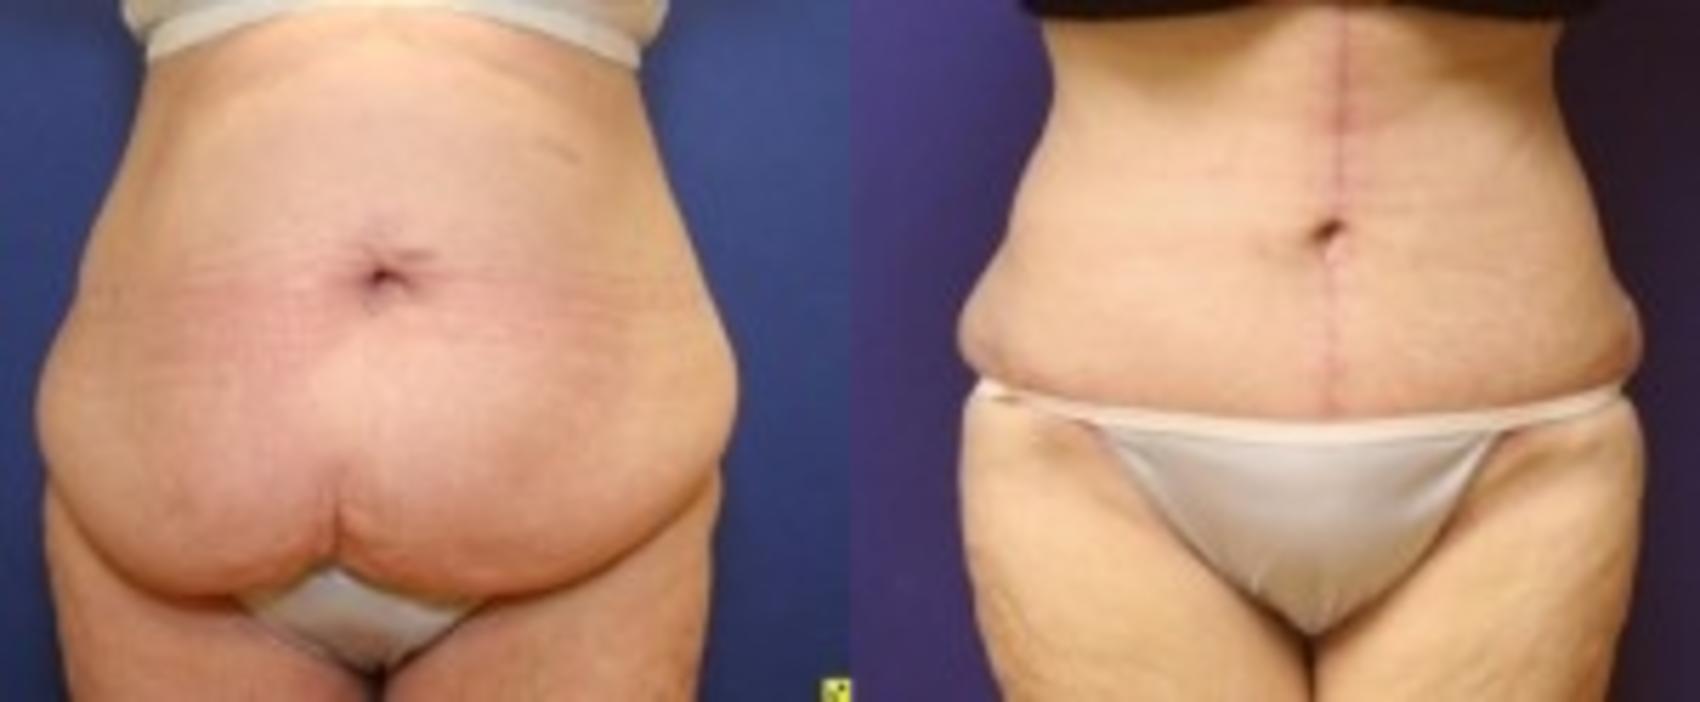 Before & After Body Contouring After Weight Loss Case 242 Front View in Ann Arbor, MI